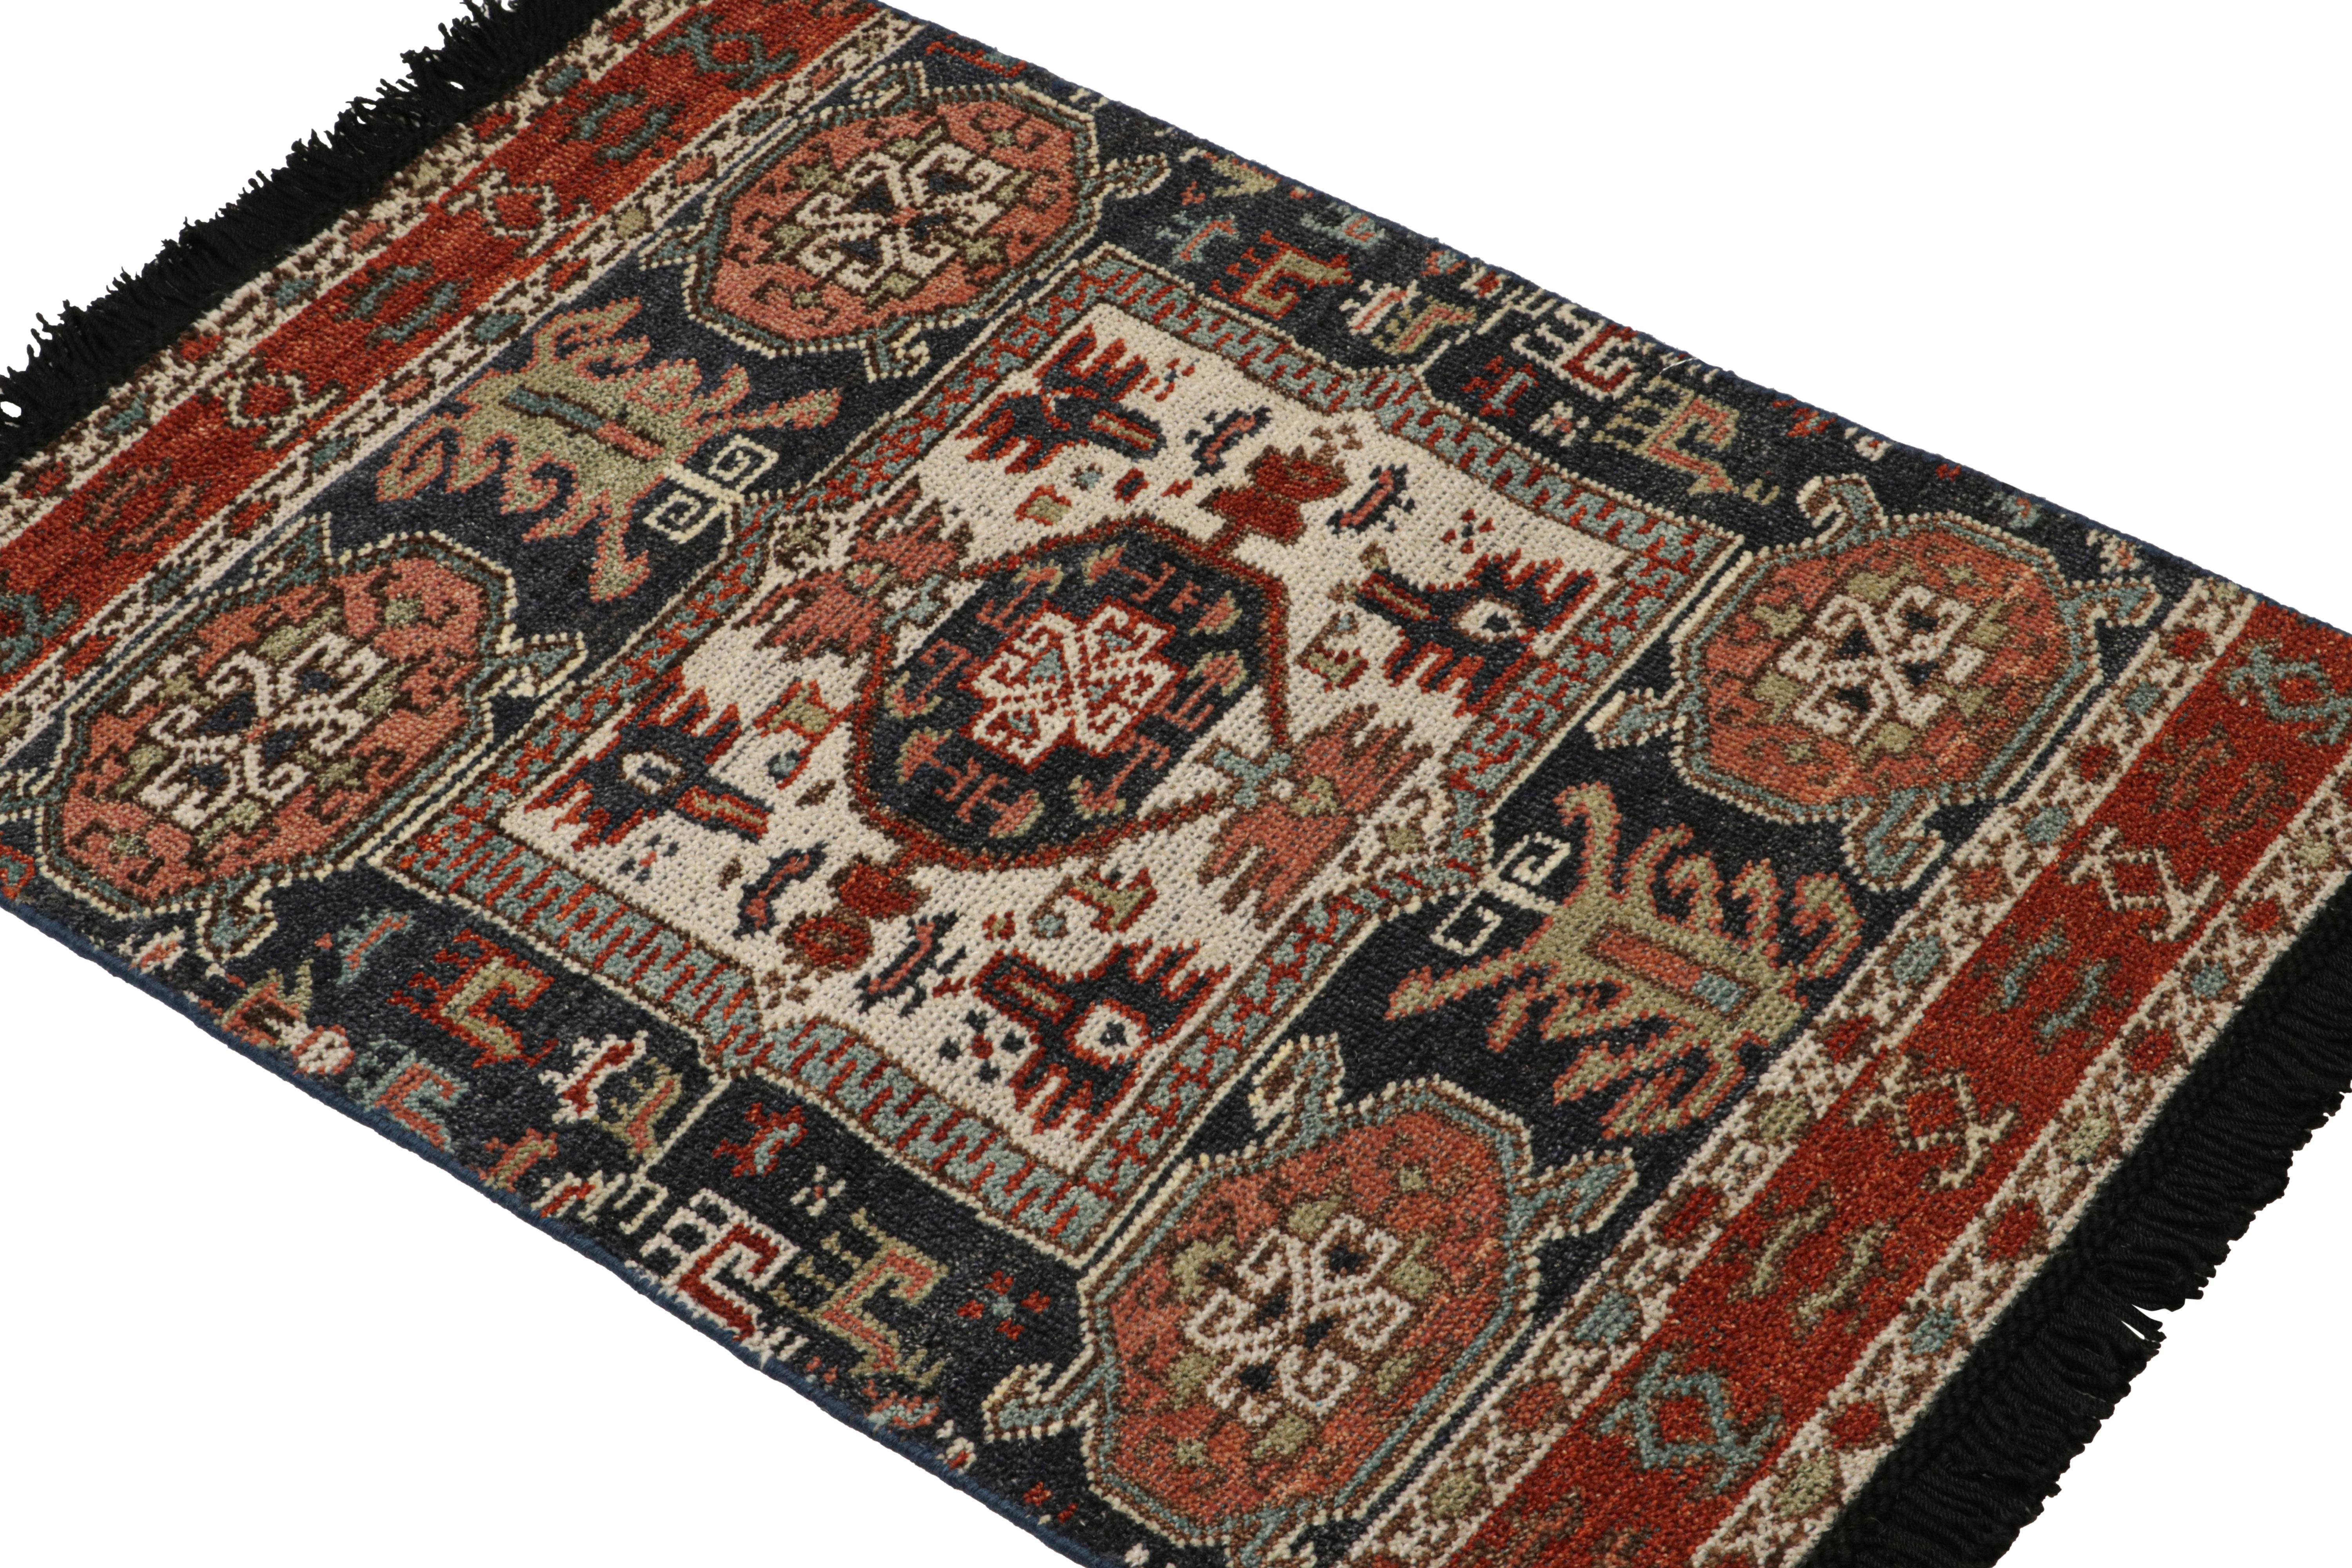 Inspired by antique tribal rugs, particularly in its love of medallions in the geometric gul style, this 2x3 rug is hand-knotted in wool. 

On the Design: 

Particularly inspired by the nomadic pieces, it features an archaic primitivist weaving